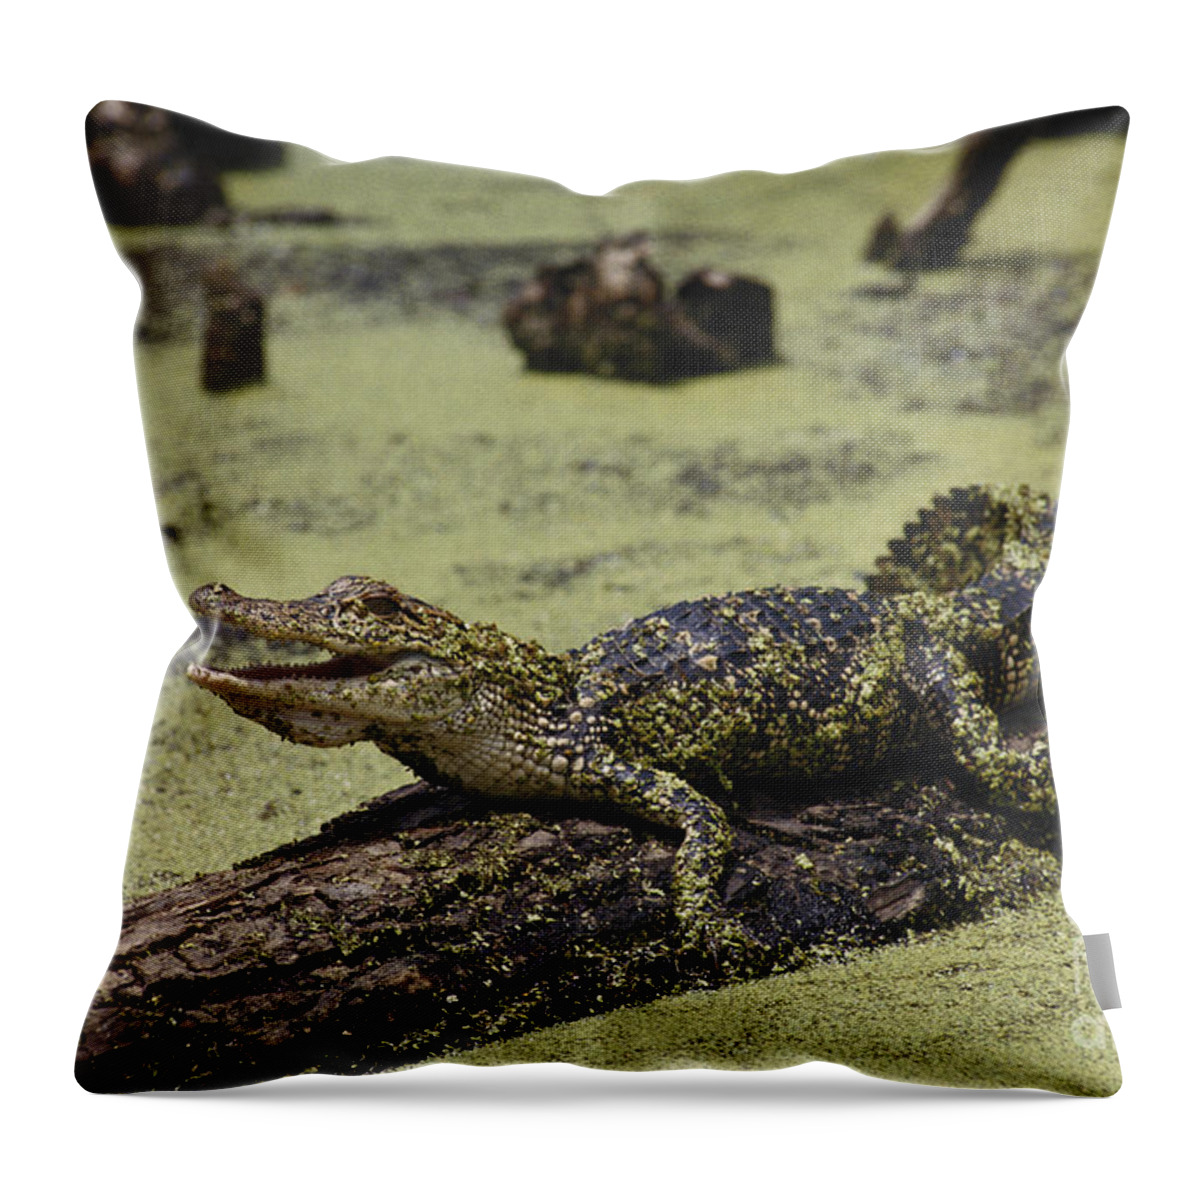 American Alligator Throw Pillow featuring the photograph Young Alligator by Gregory G. Dimijian, M.D.